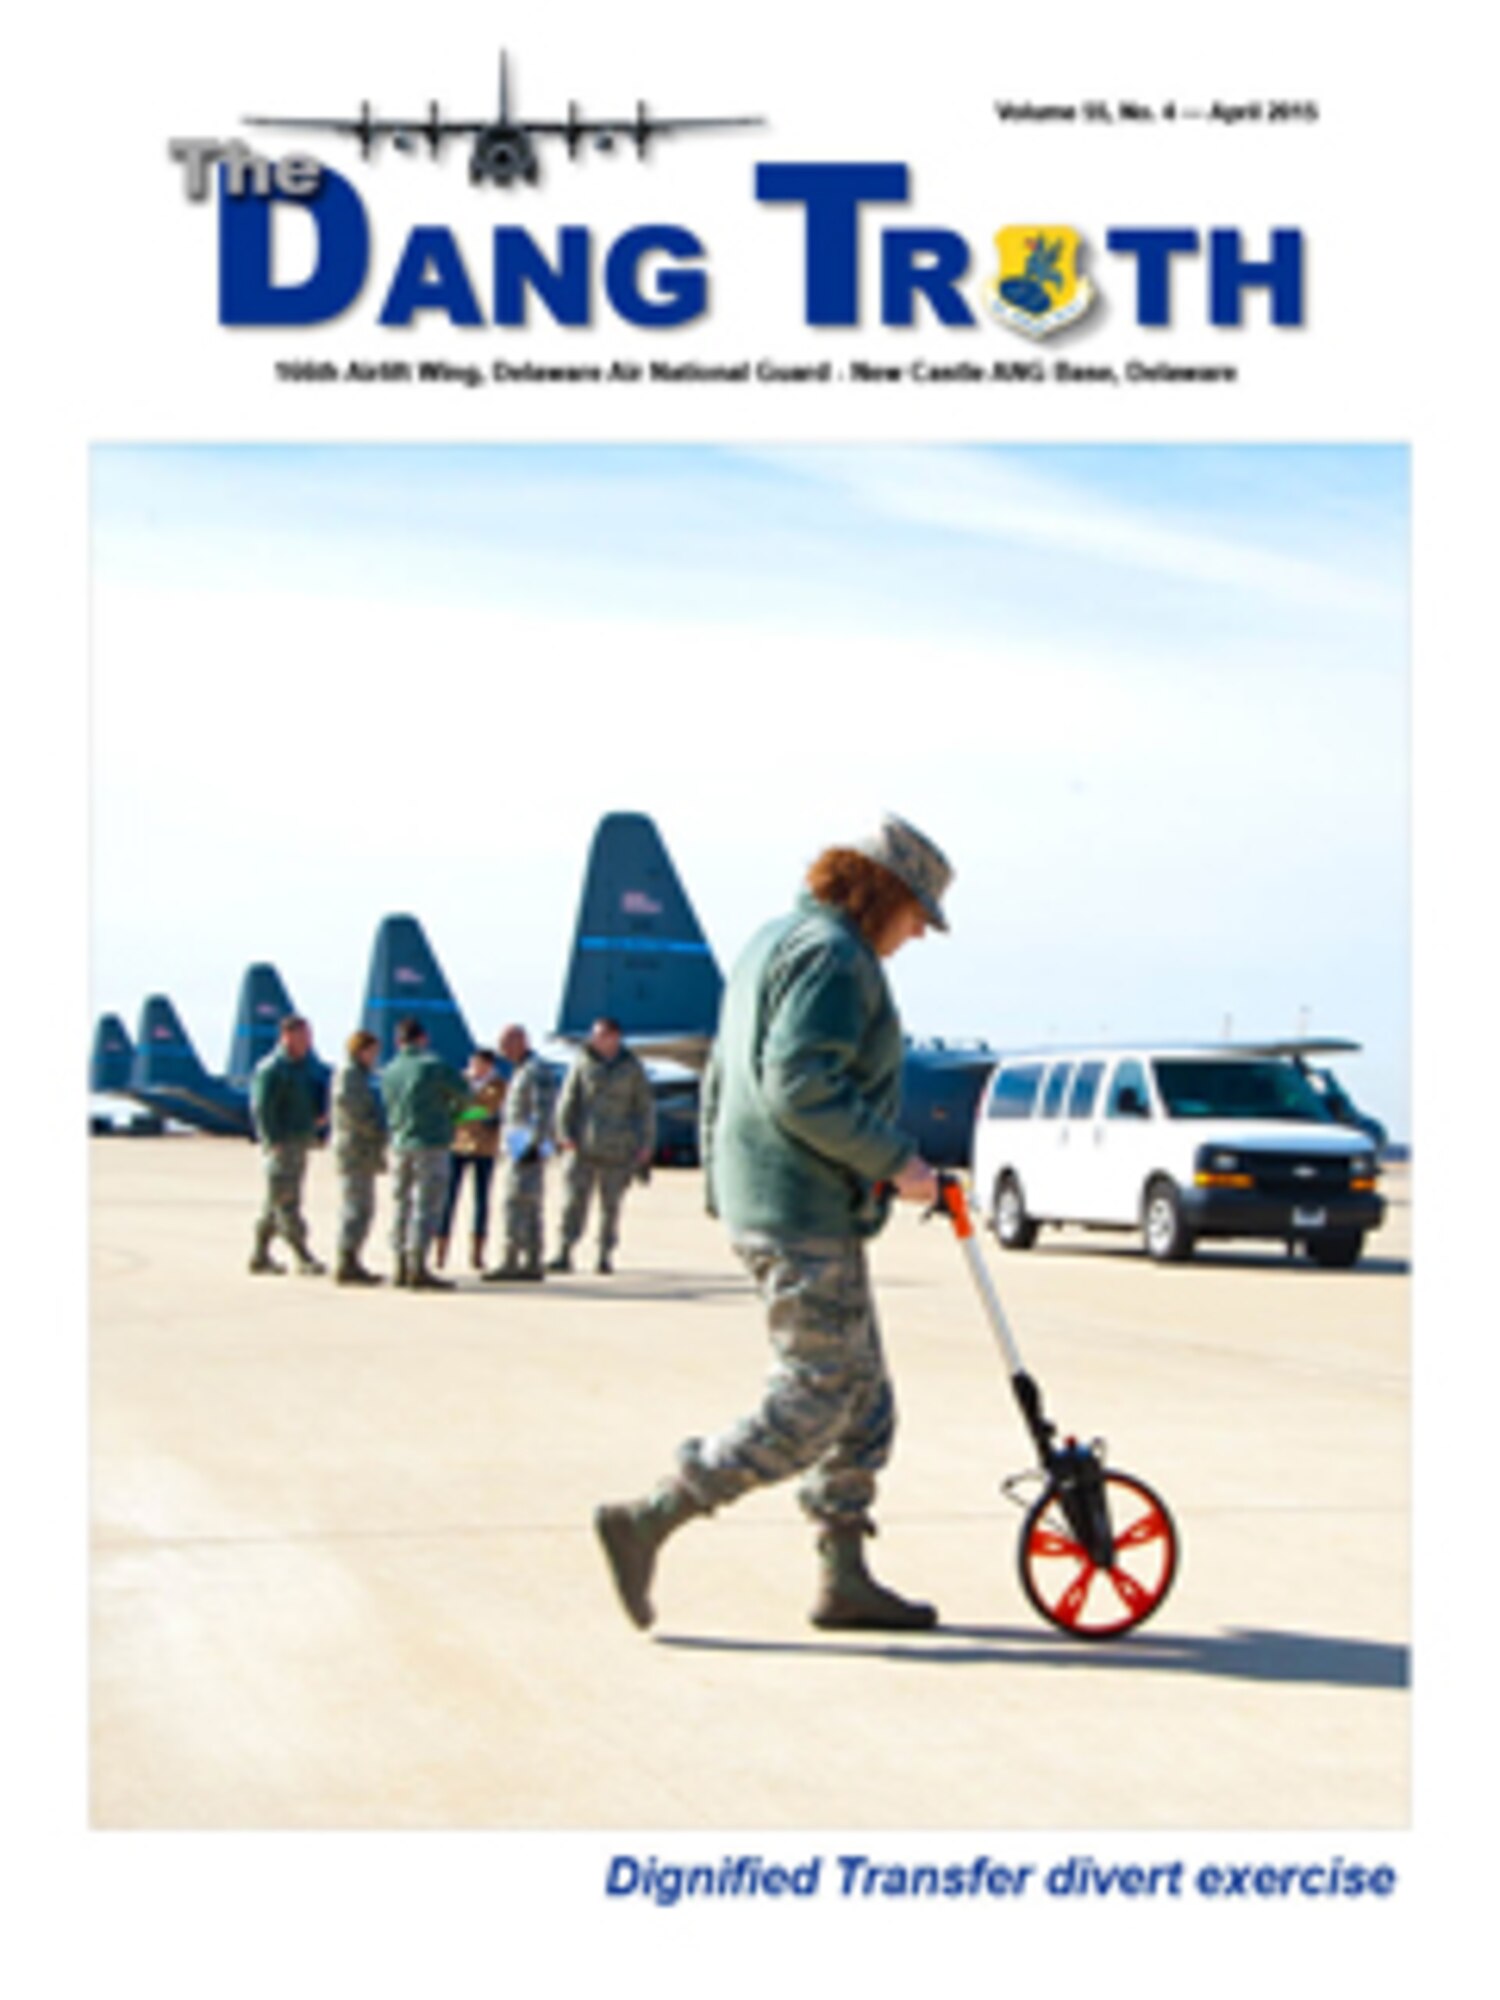 Cover of the April 2015 edition of The DANG Truth, the official electronic newspaper of the 166th Airlift Wing, Delaware Air National Guard.